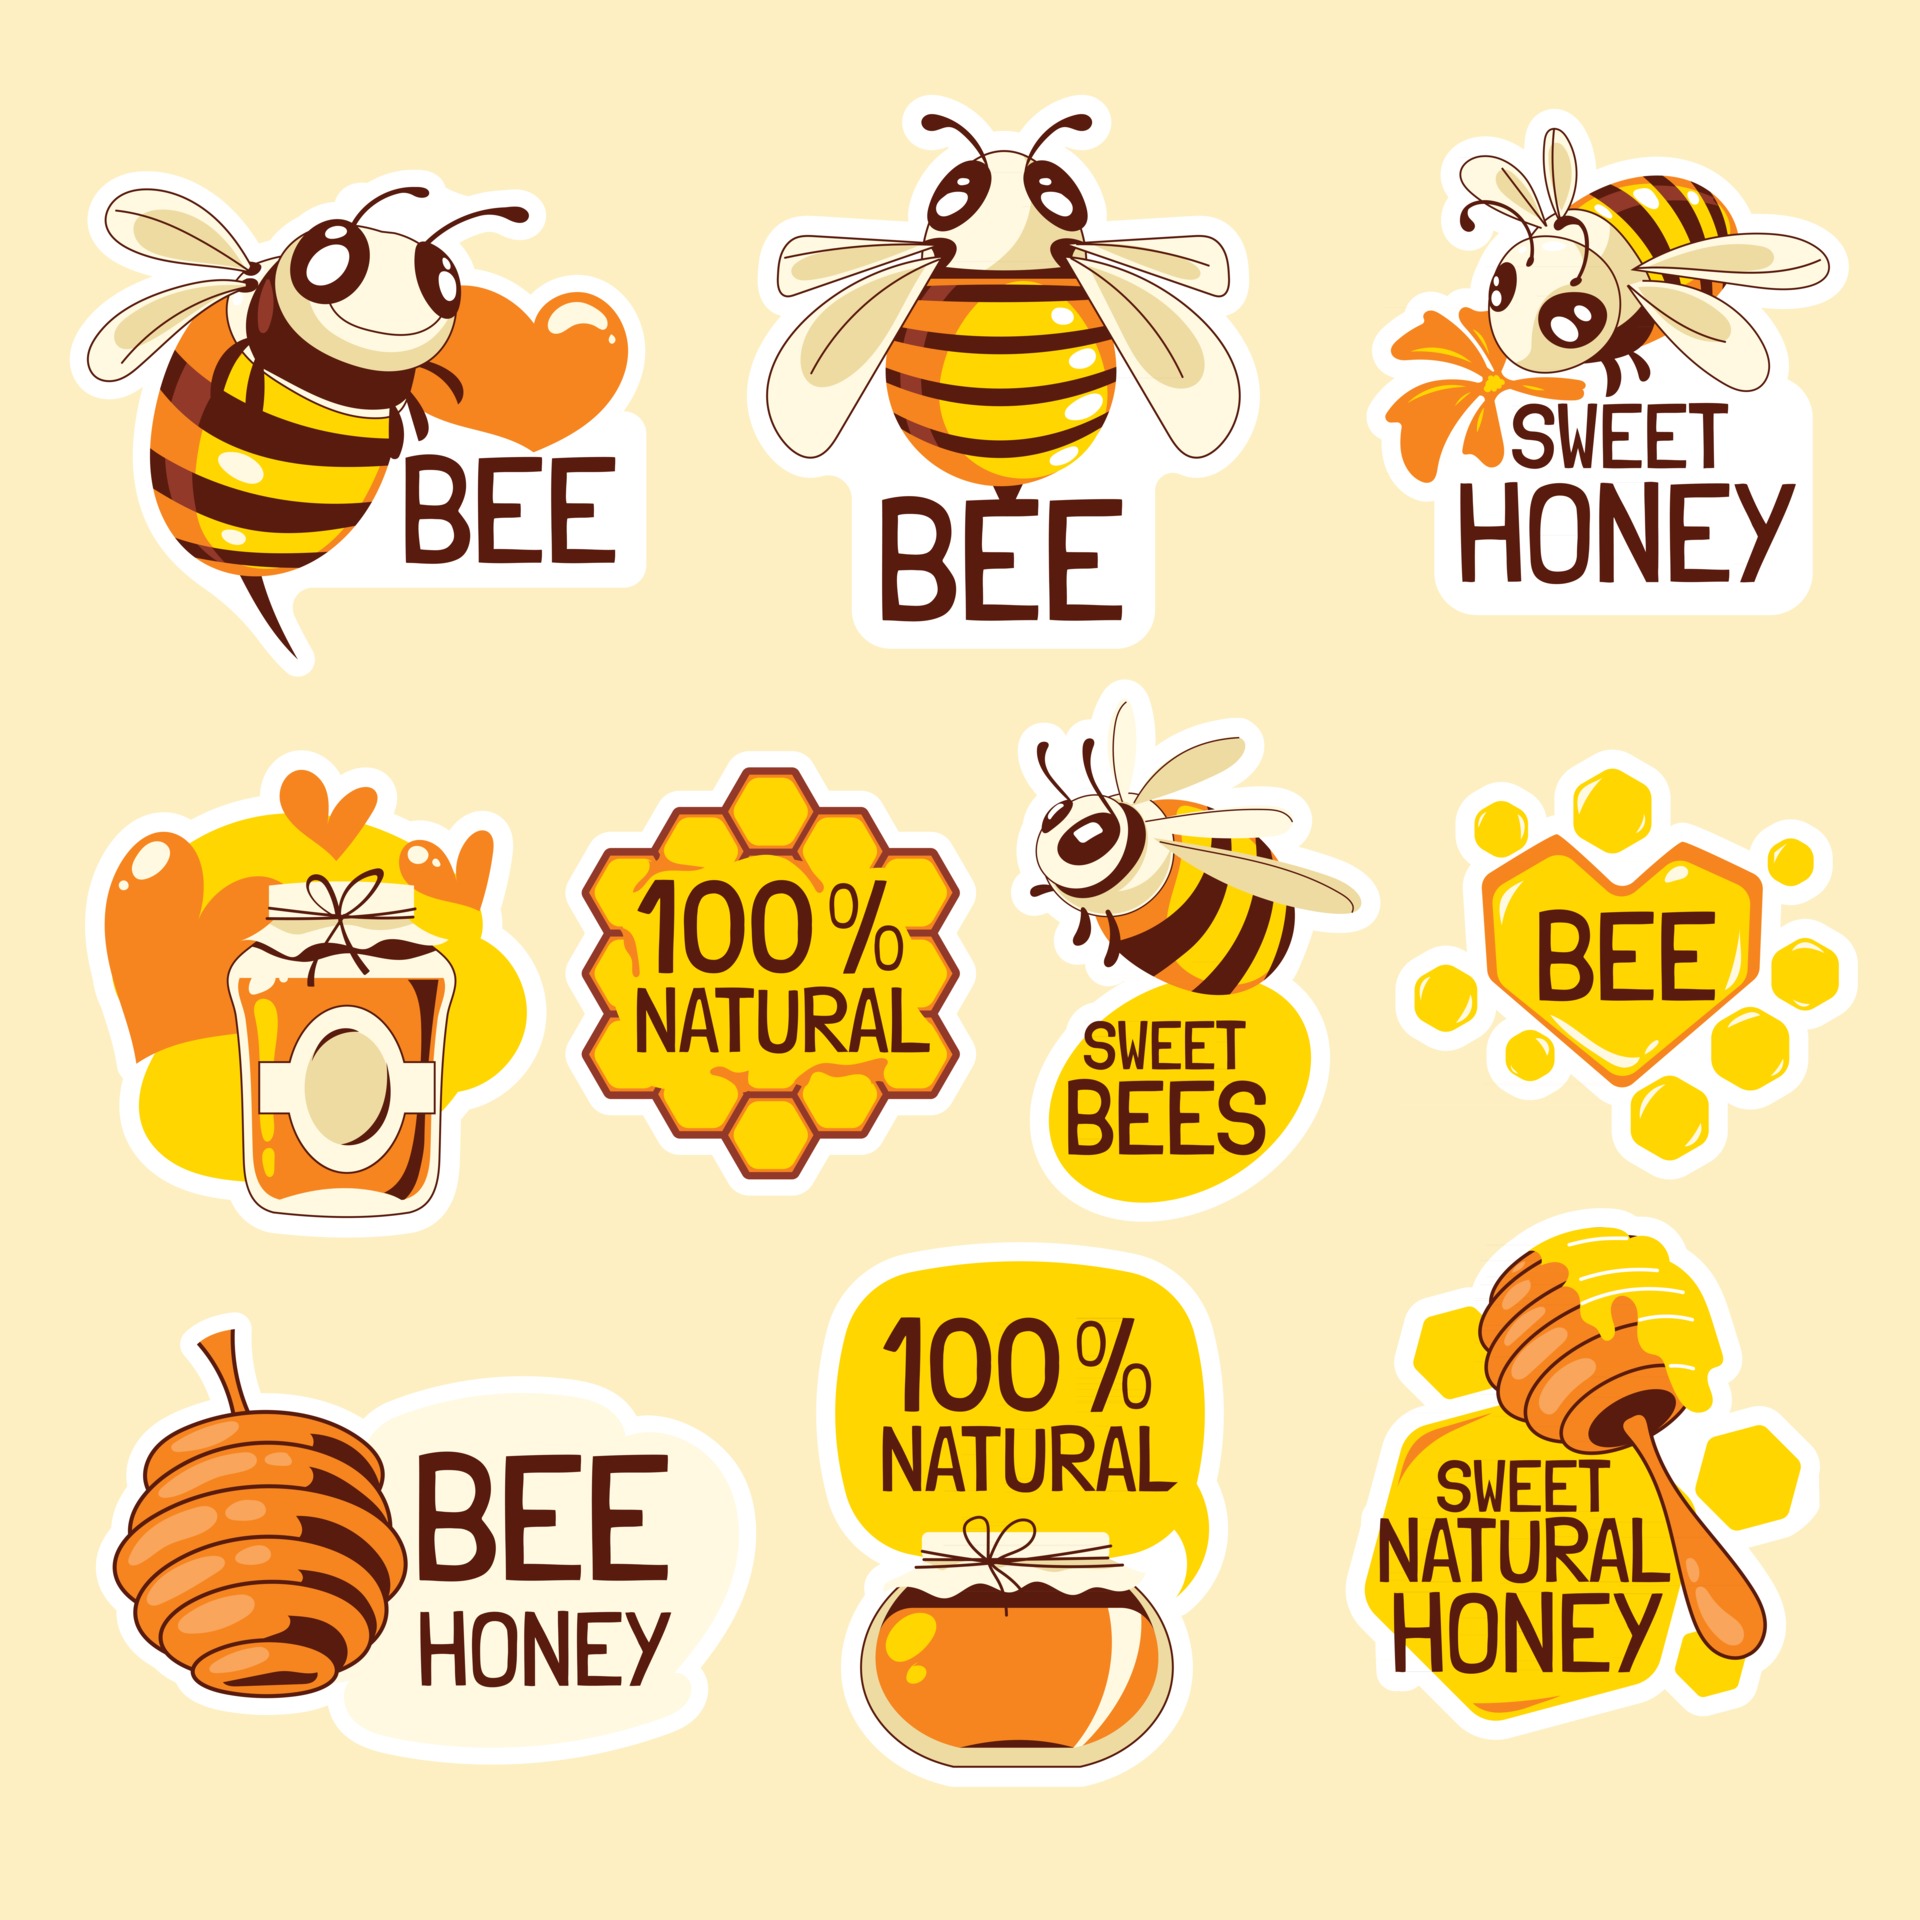 save the bee's Sticker for Sale by Bea-Creative  Bee sticker, Scrapbook  stickers printable, Bee drawing